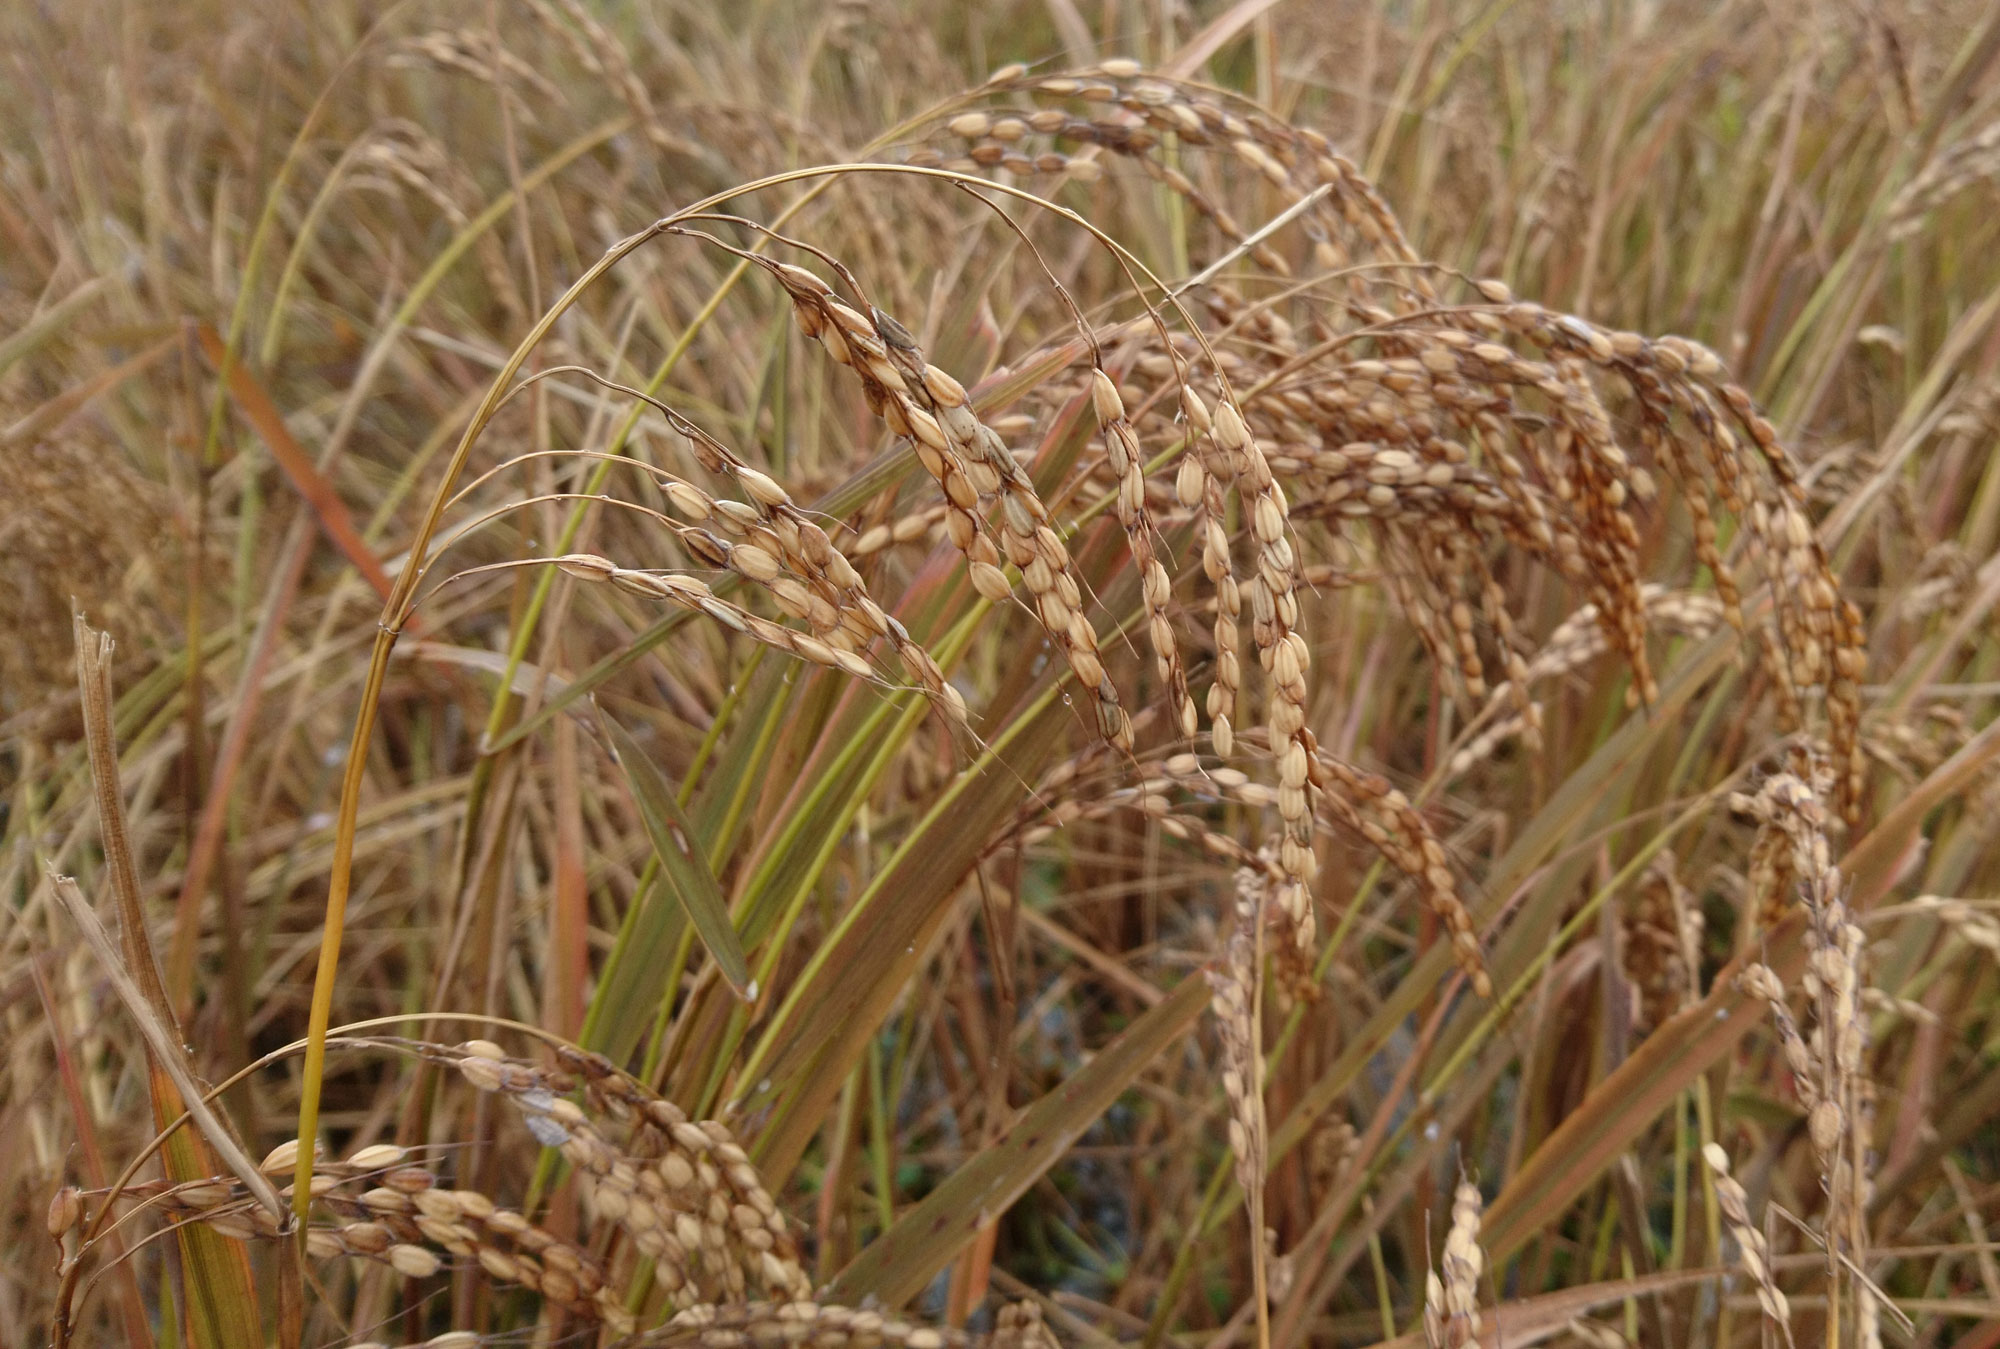 Photograph of rice plants in a field. The photo shows a close view of rice plants with nodding inflorescences bearing grain.